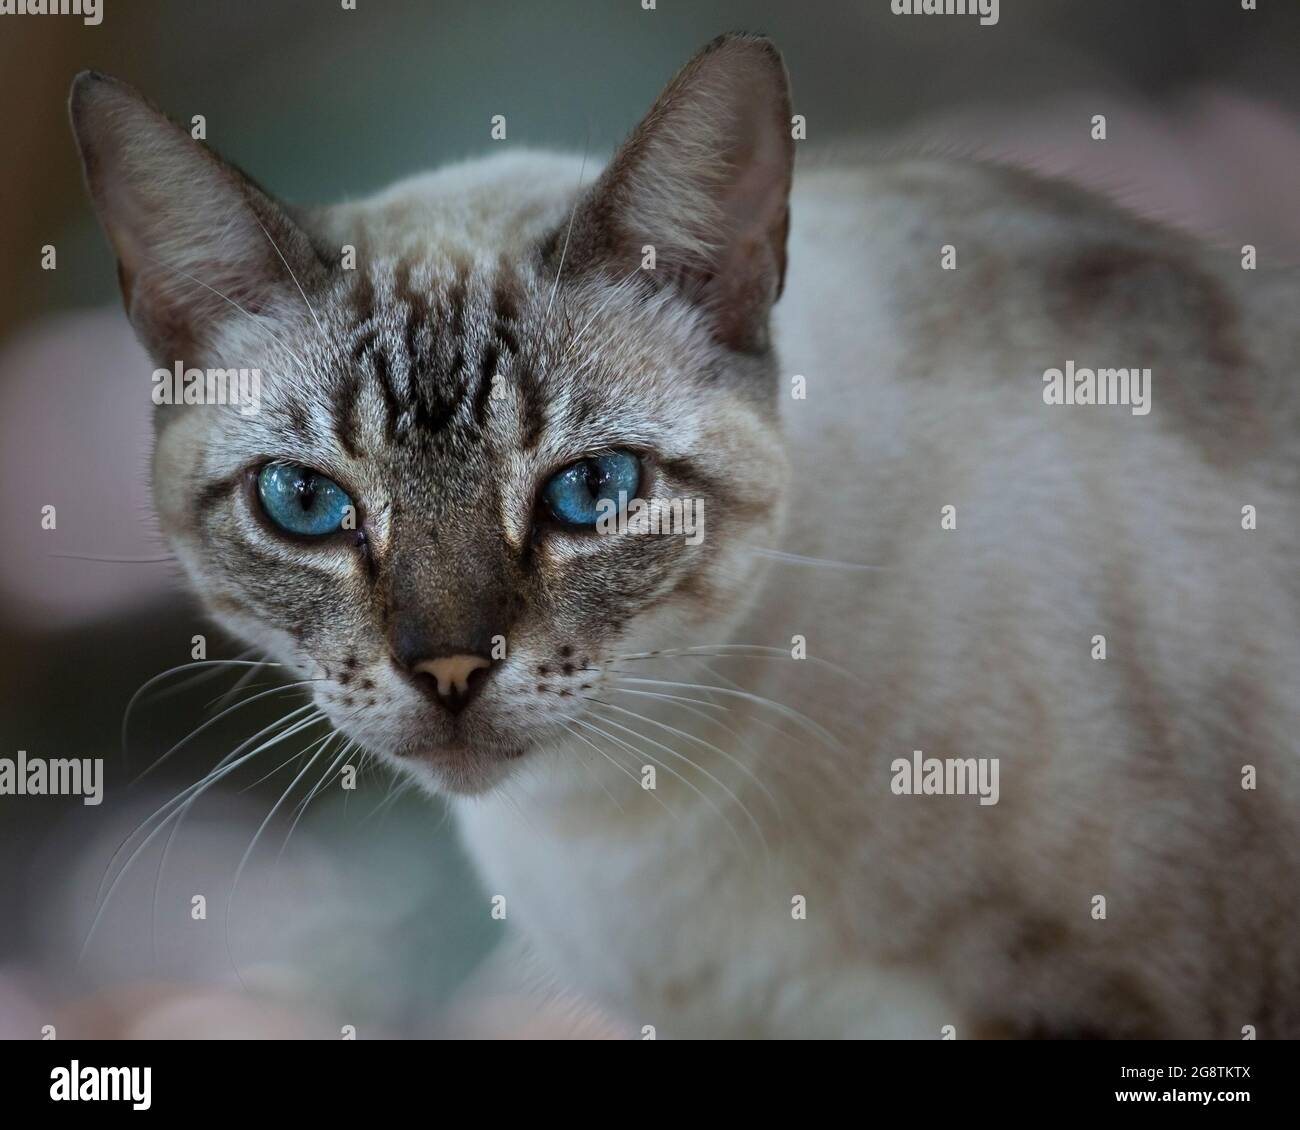 Blue-eyed tabby cat face close up Stock Photo